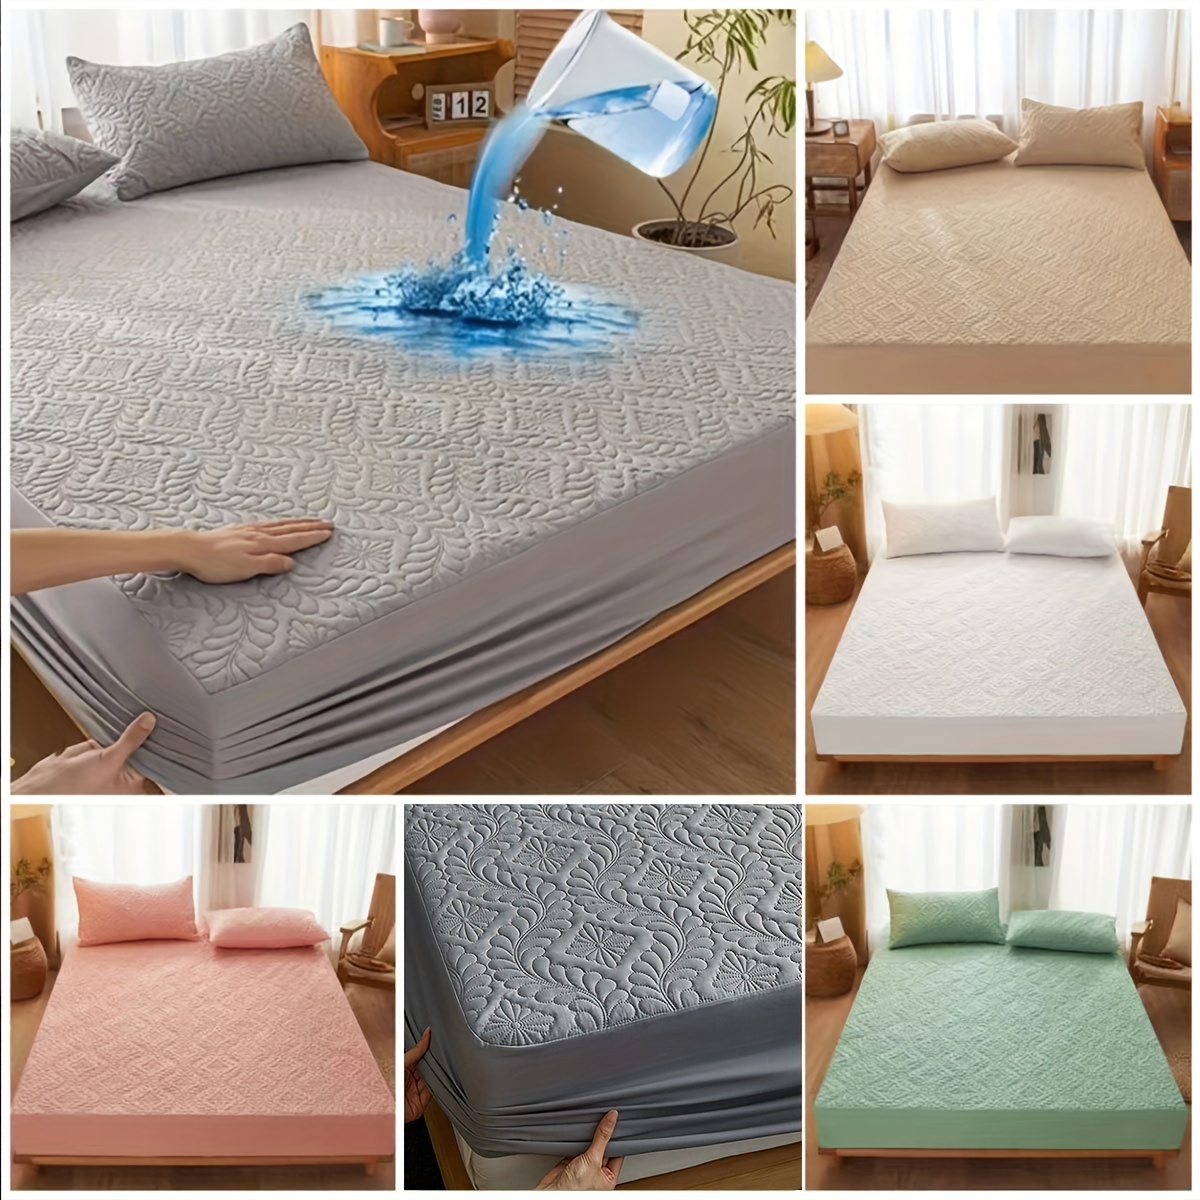 Quilted Add Cotton Thick Bed Sheets Bed Textile Bedding Flat Sheet Lace Bed  Sheet Covers Soft Warm Bedsheets Bedskirt Mattress Protector